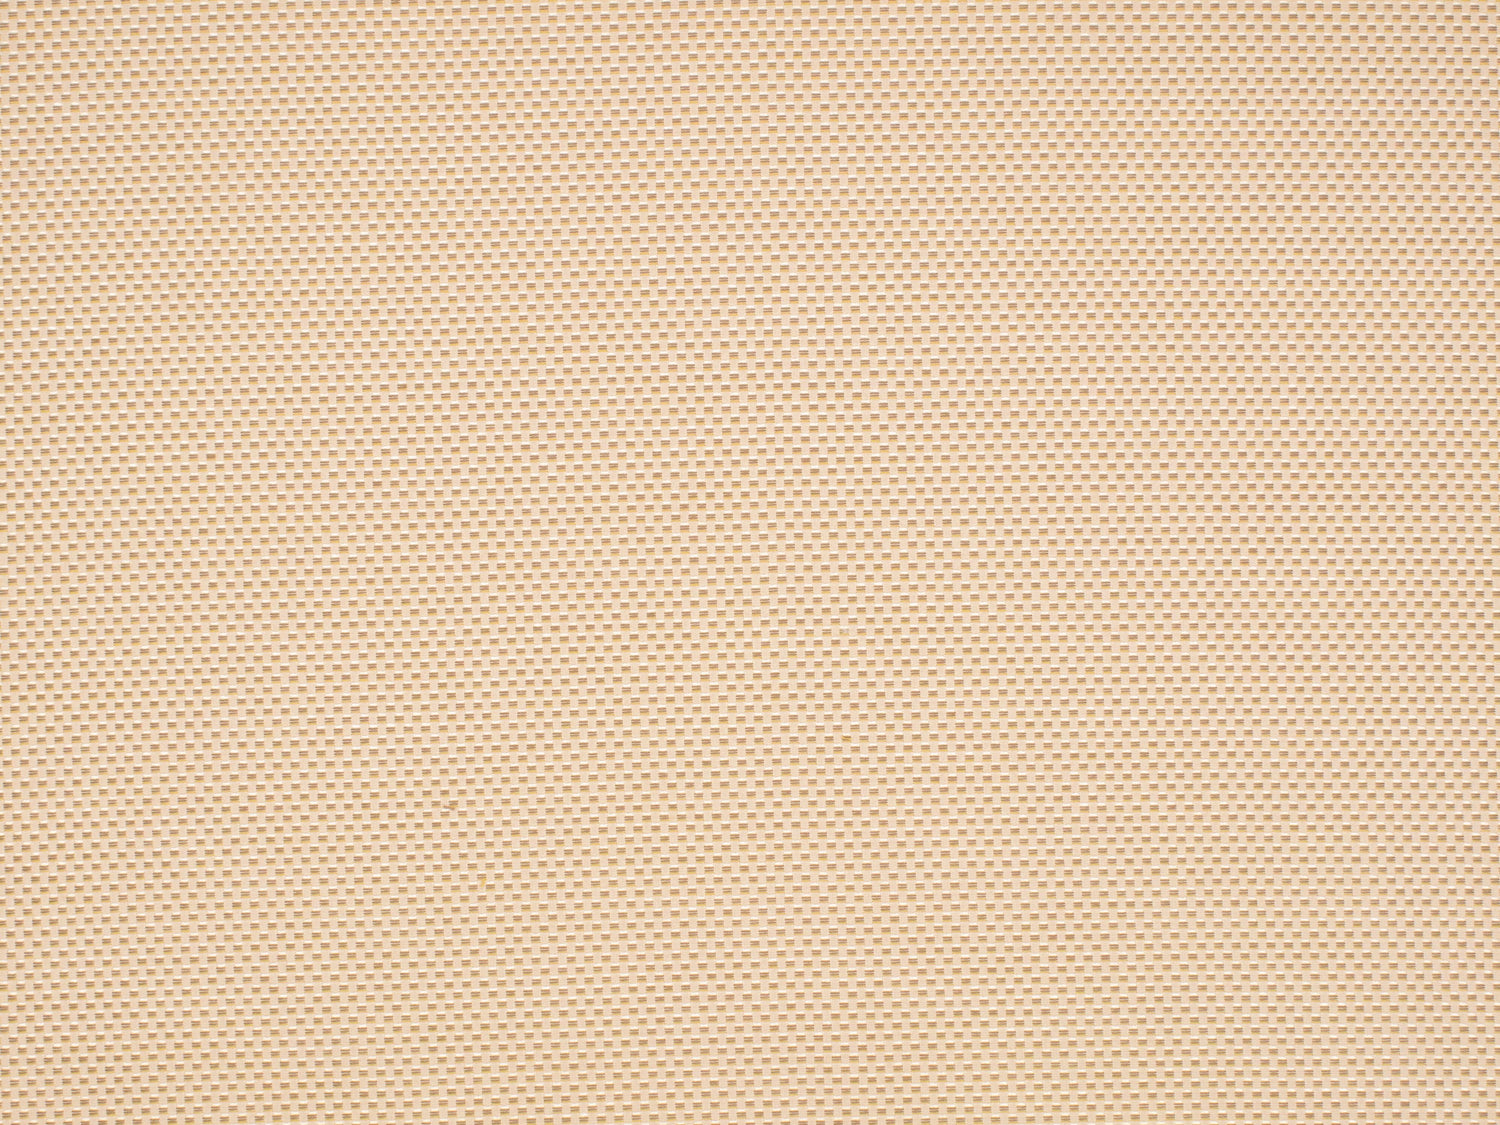 Corsini fabric in dune color - pattern number SU 00081001 - by Scalamandre in the Old World Weavers collection